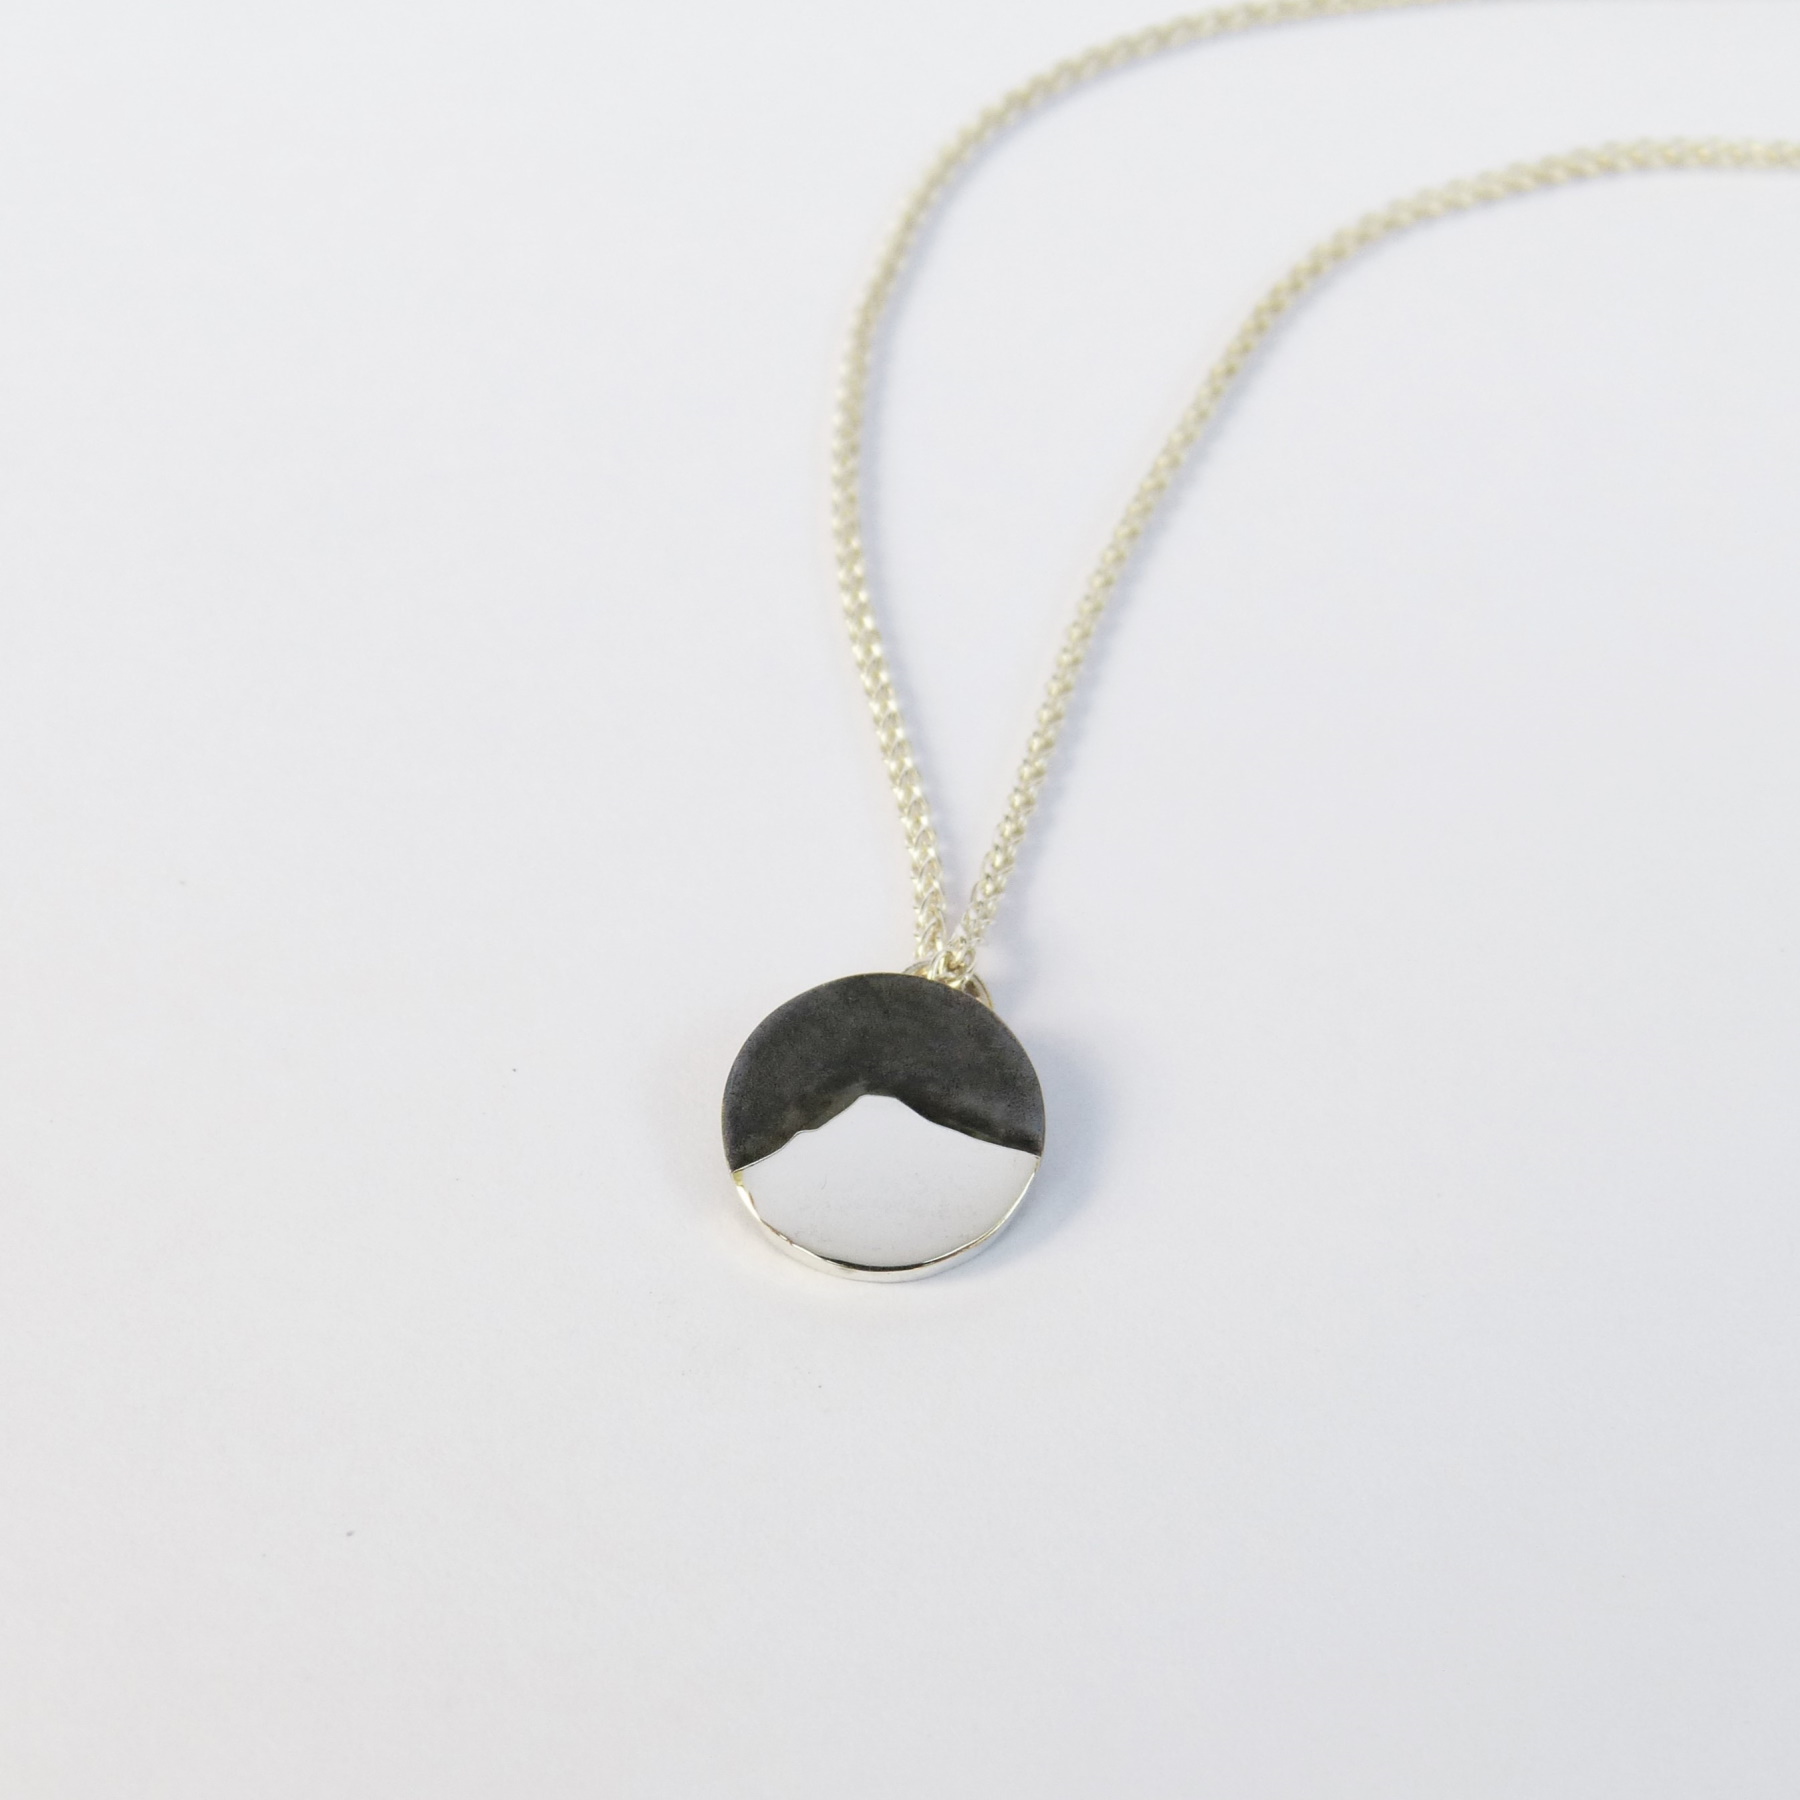 'Goatfell Pendant | Polished and Oxidised' by artist Jen Cunningham